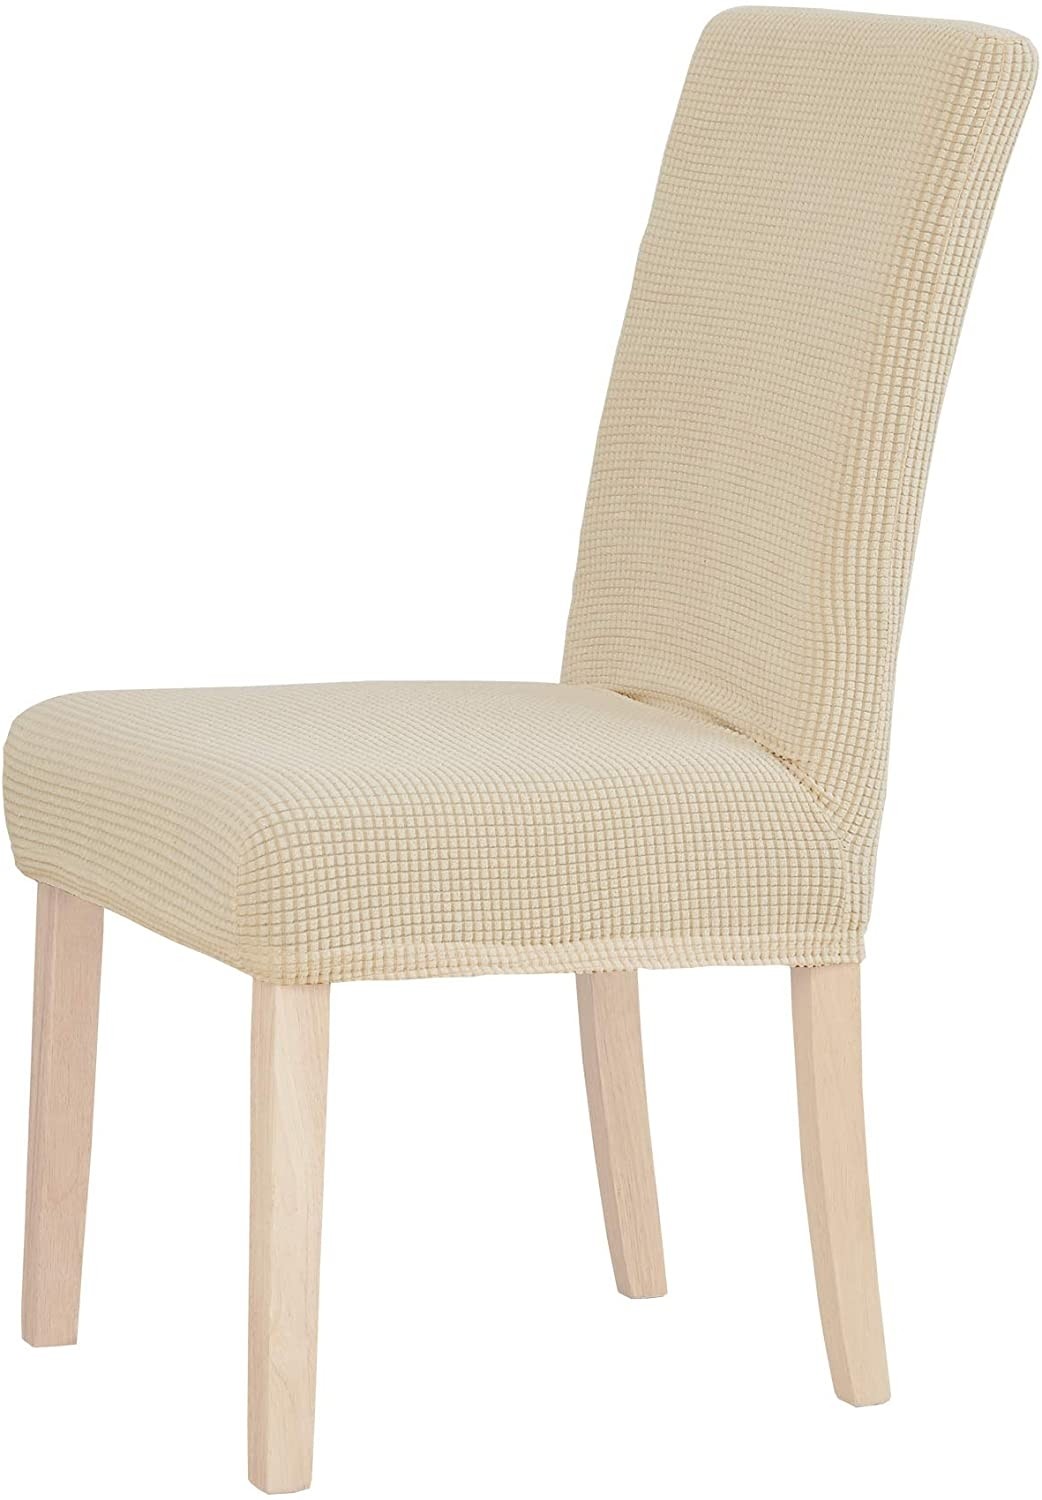 Best armless accent chair removable washable slipcover 1